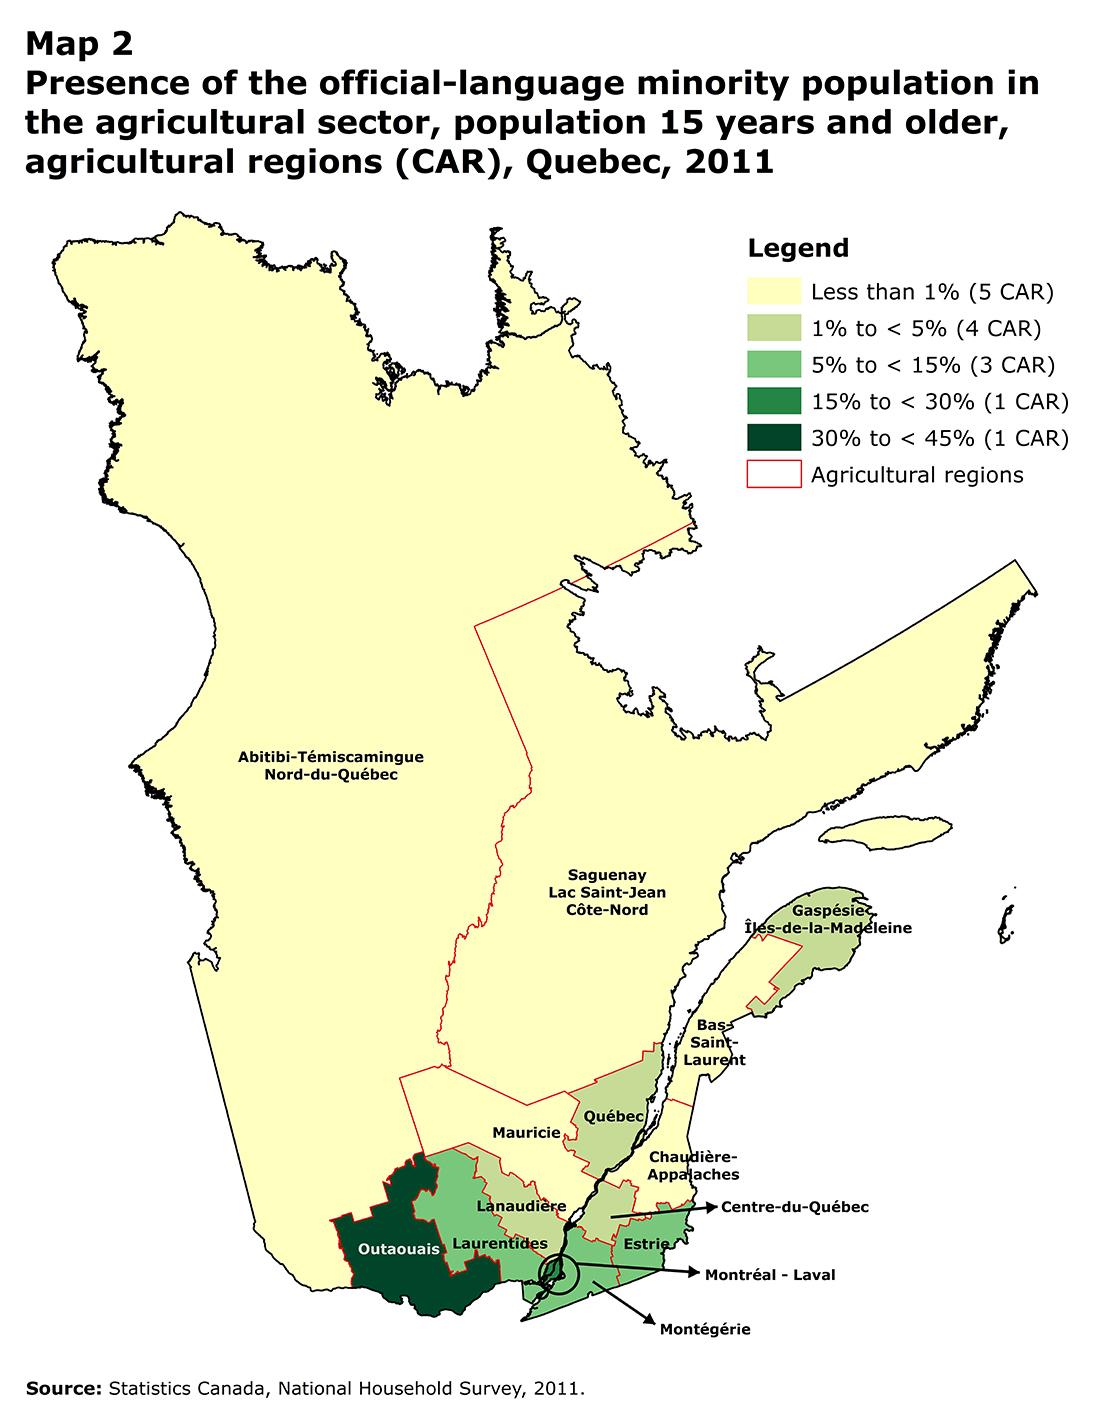 Map 2 Presence of the official-language minority population in the agricultural sector, population 15 years and older, agricultural regions (CAR), Quebec, 2011